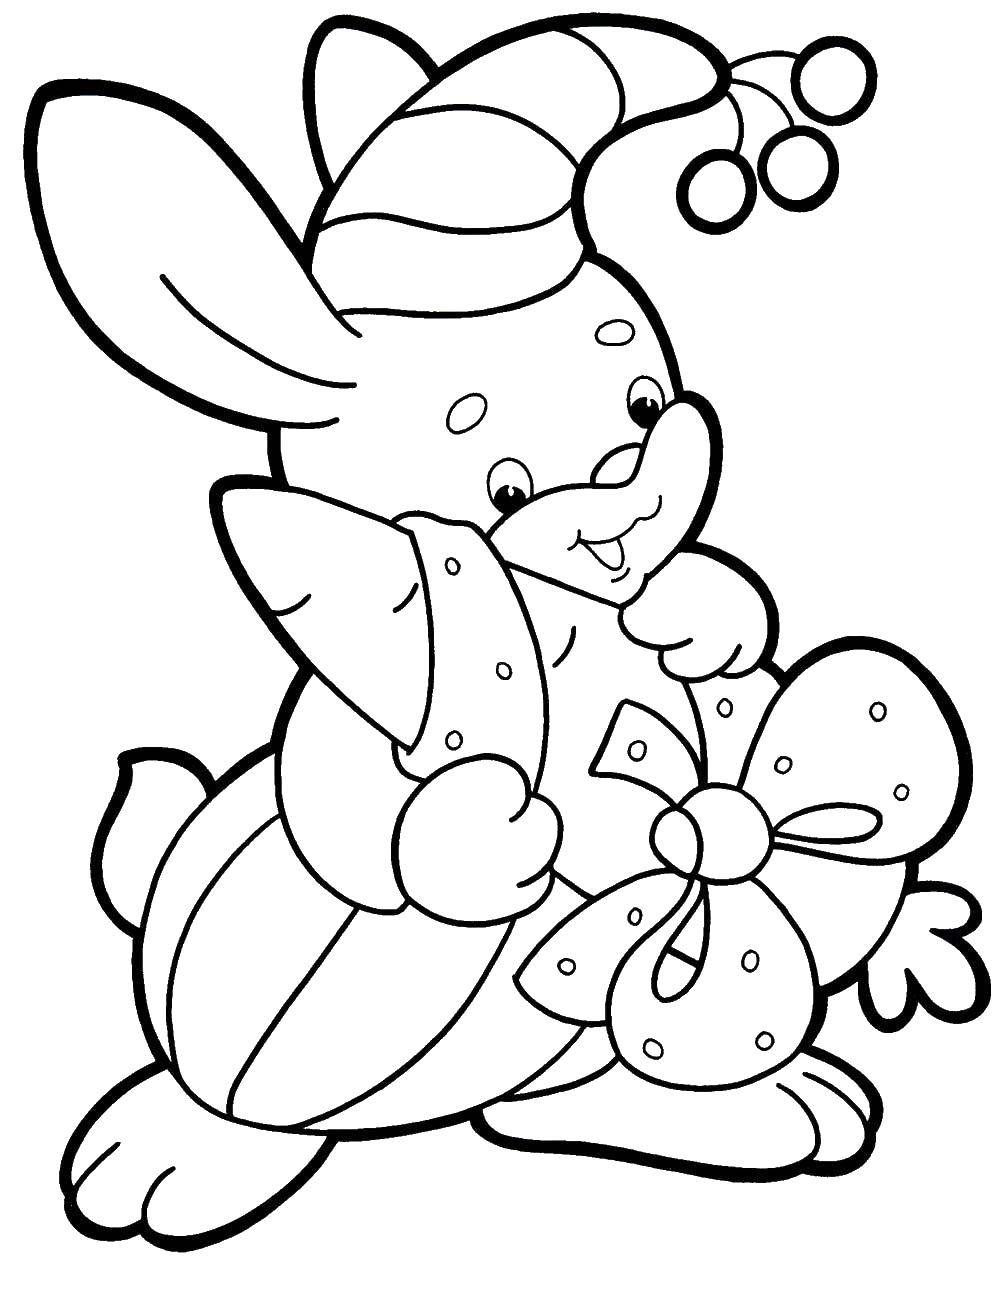 Coloring Carrot for Bunny. Category gifts. Tags:  Gifts, holiday.